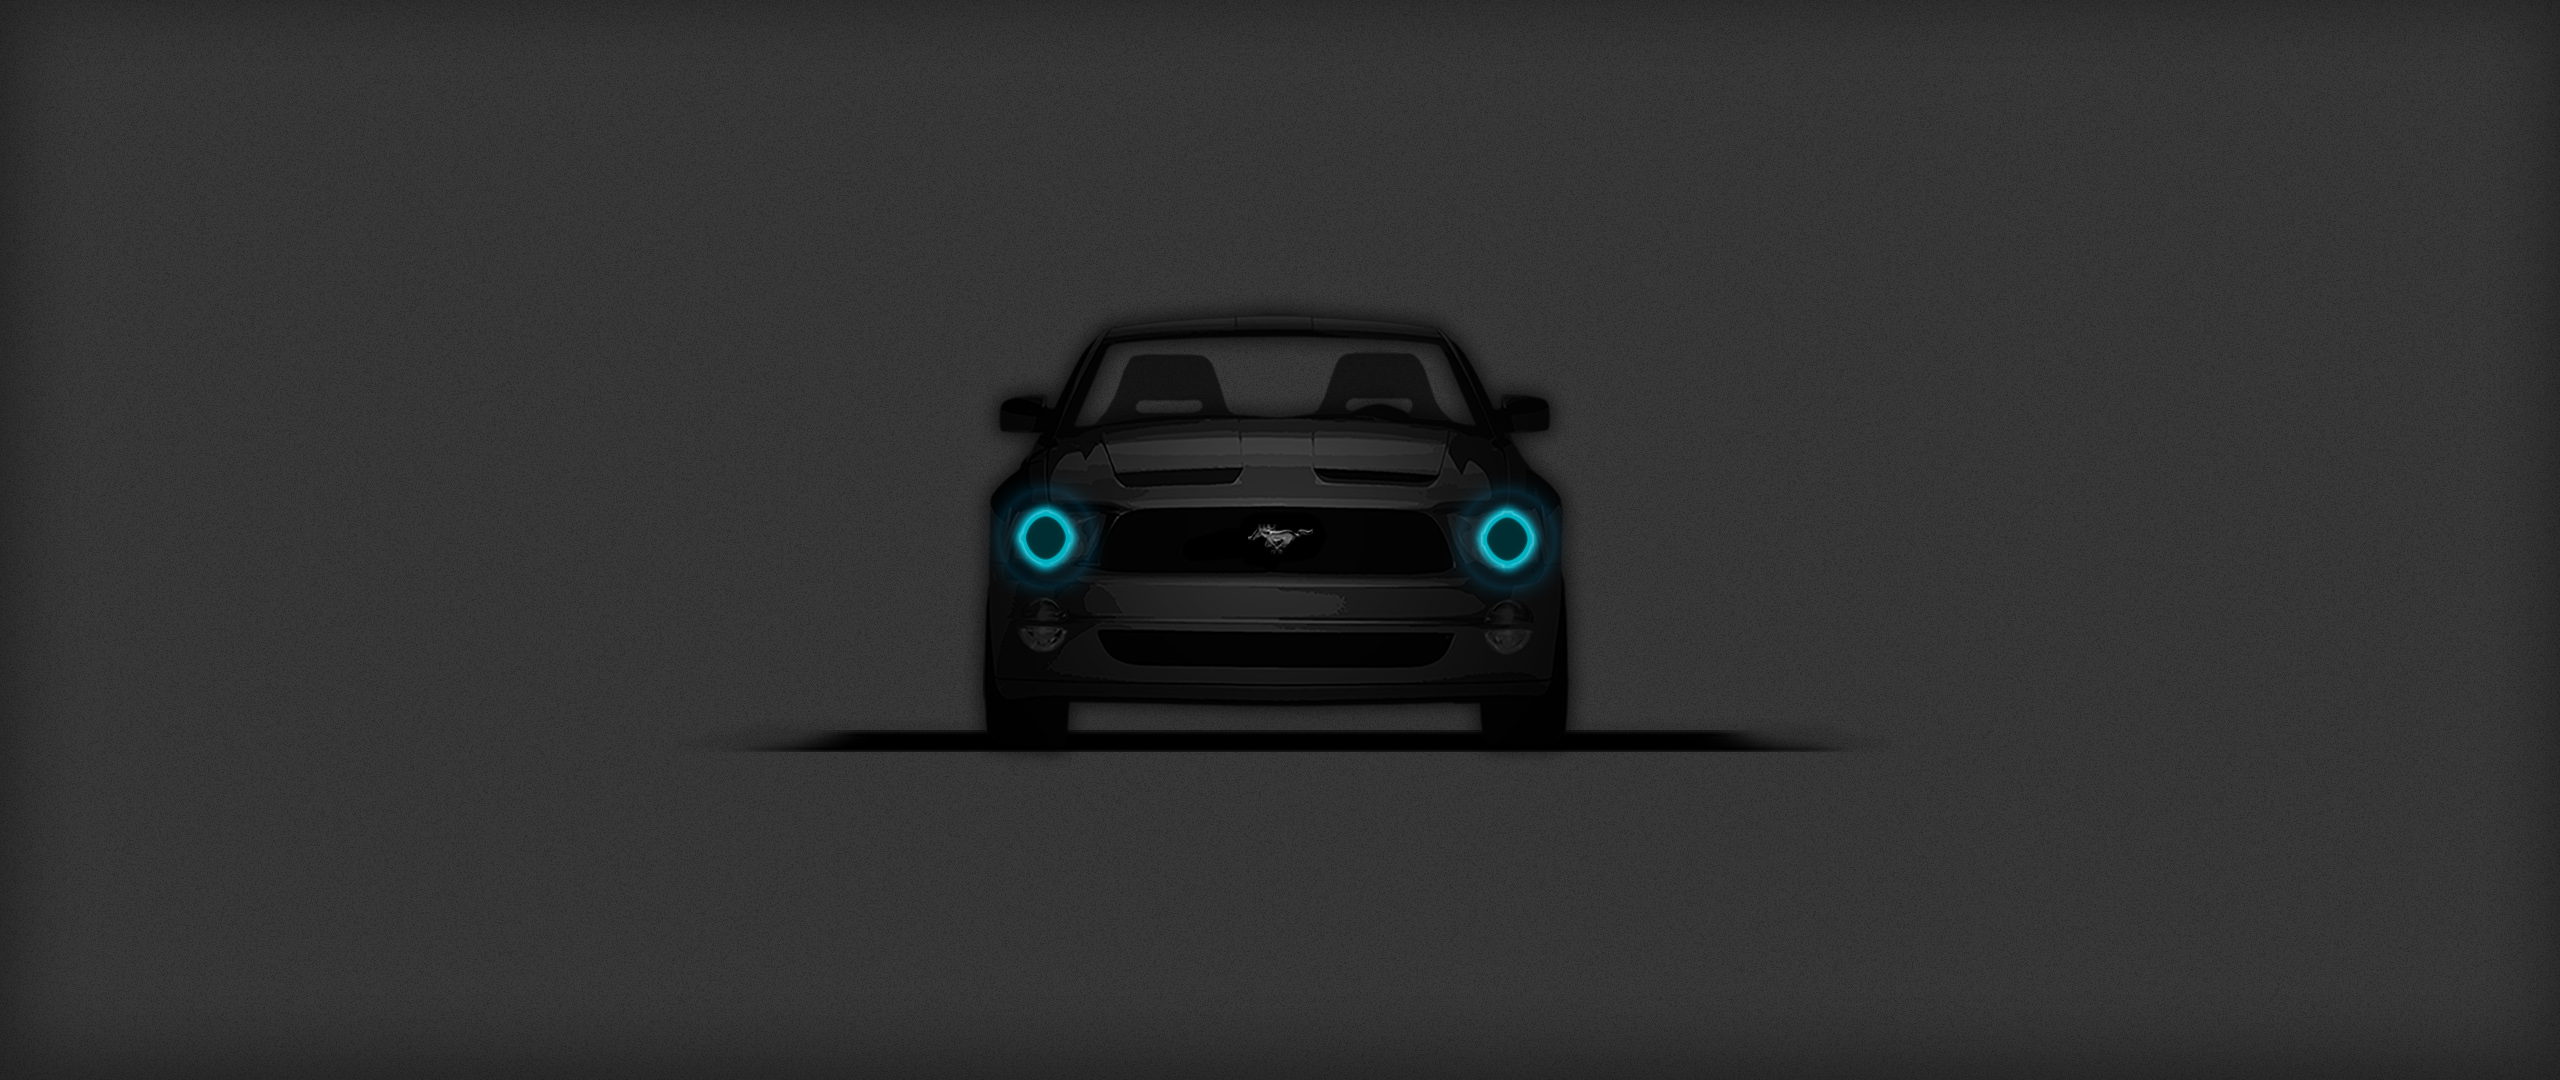 Free photo Ford Mustang silhouette with headlights on fire.